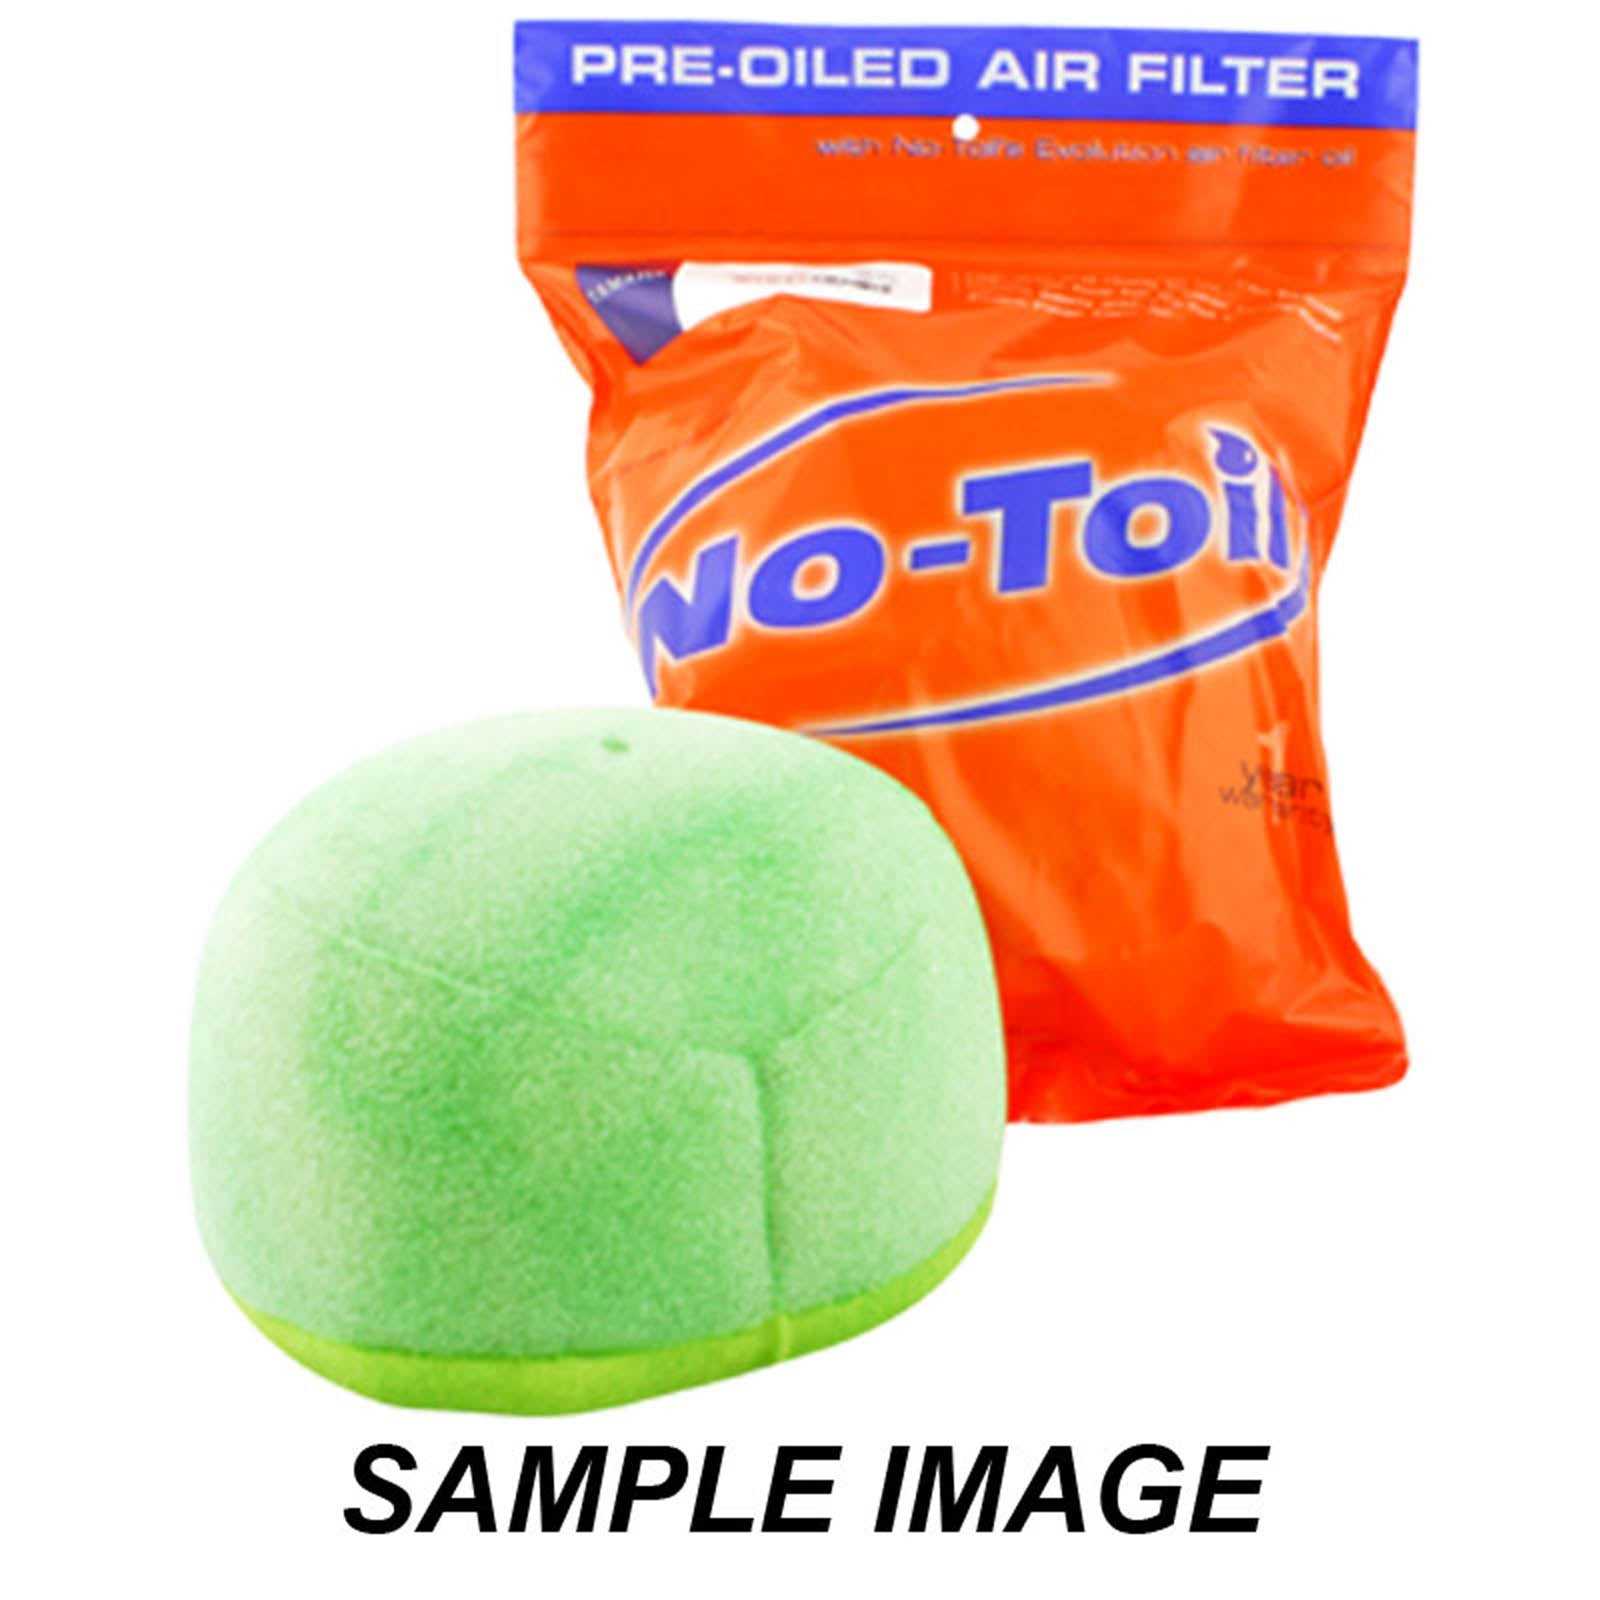 No-Toil, PRE-OILED FILTER HON CRF150R 07-20